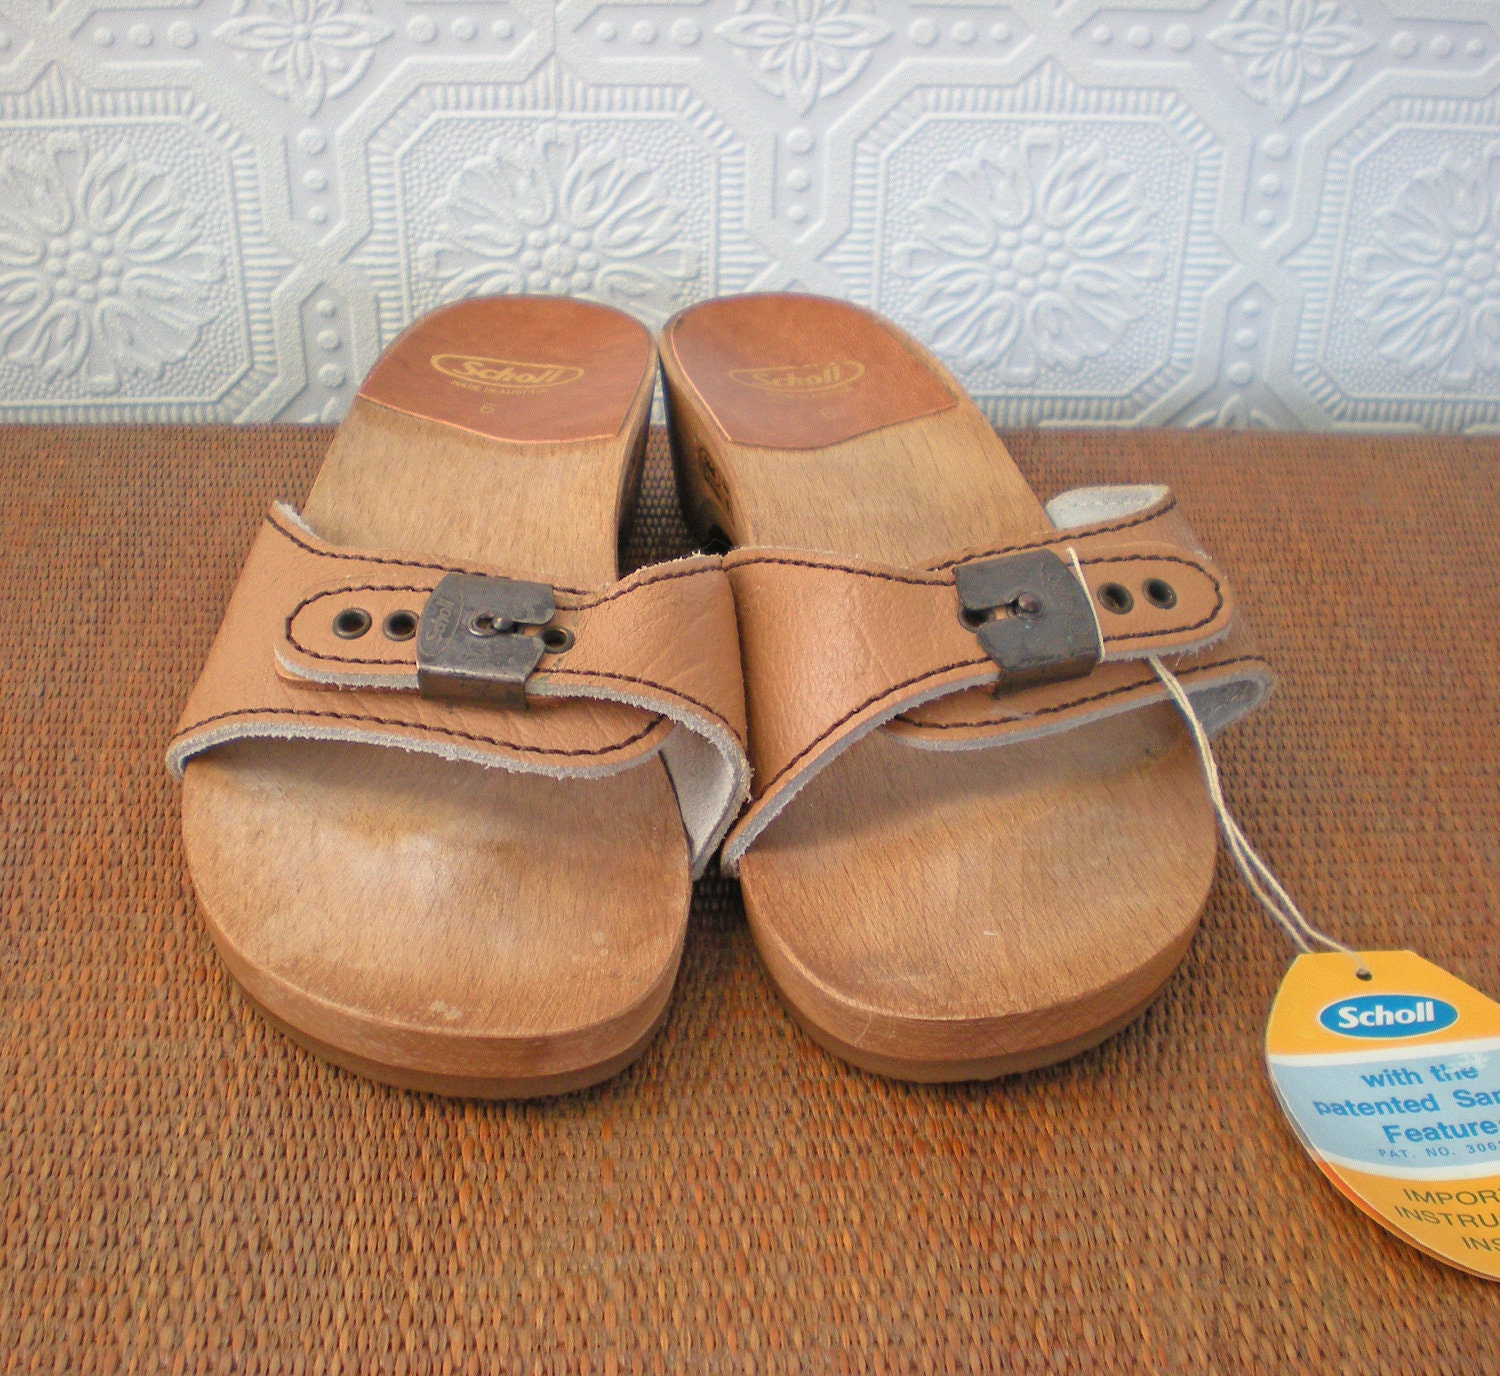 Dr Scholls Sandals New Old Stock Wooden By Calicobloomvintage